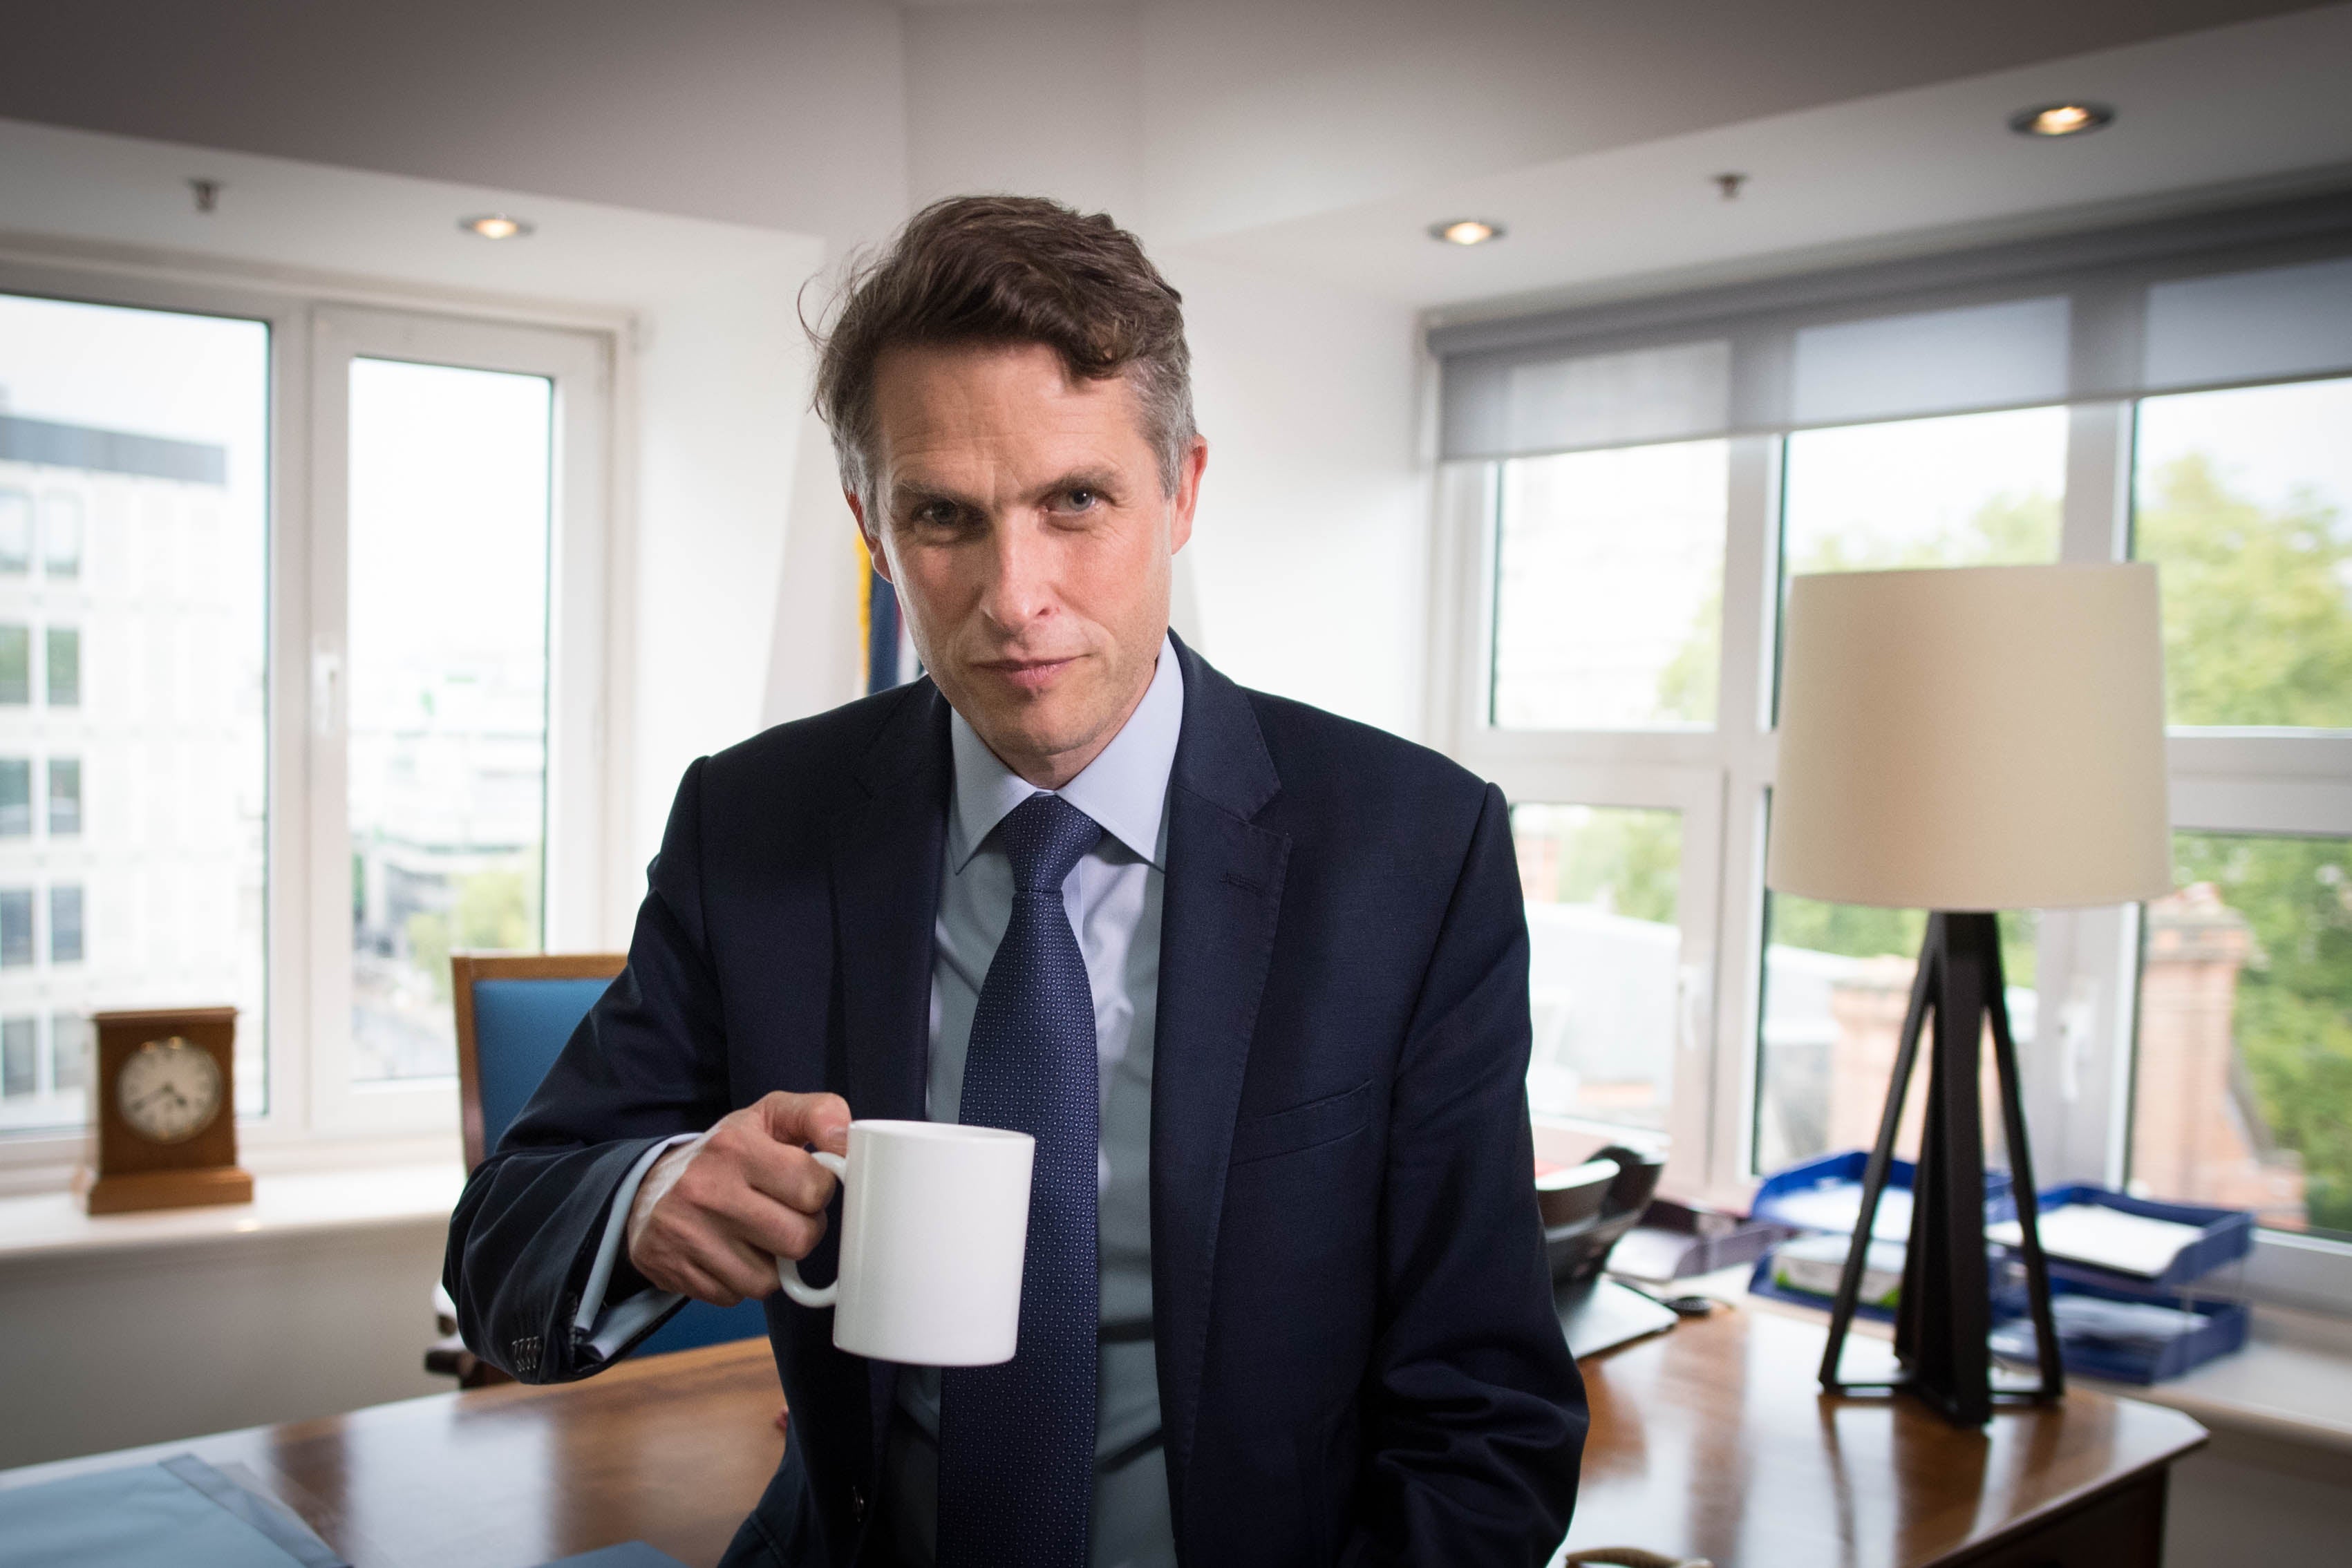 Is it possible to pity Gavin Williamson?